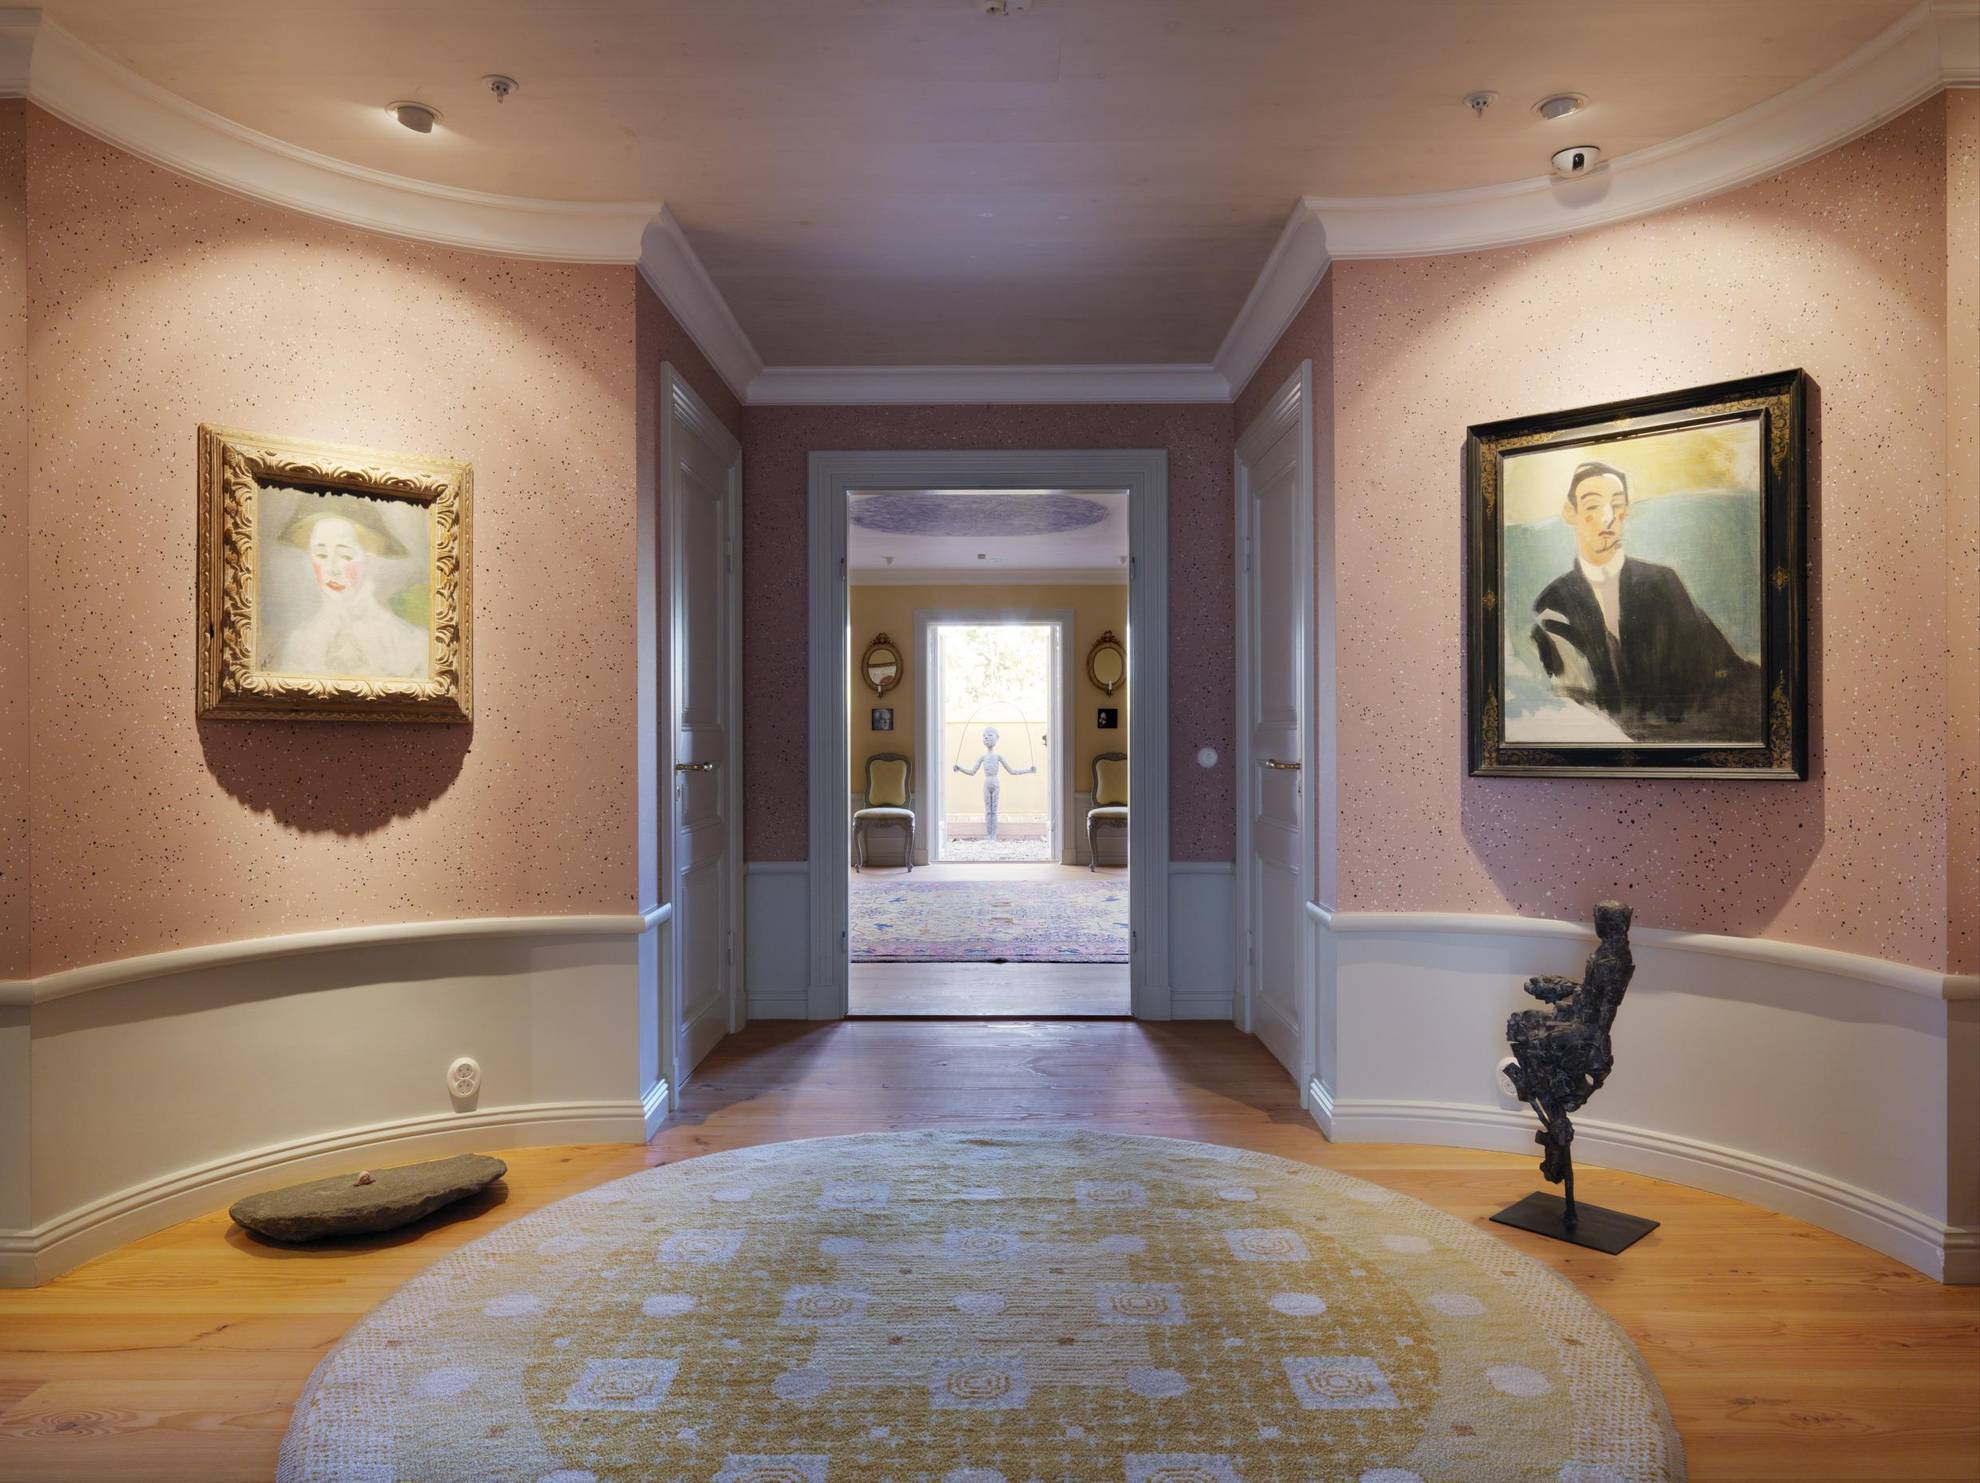 A hallway with pink tapestry and to paintings on each side of a doorway leading into another room.